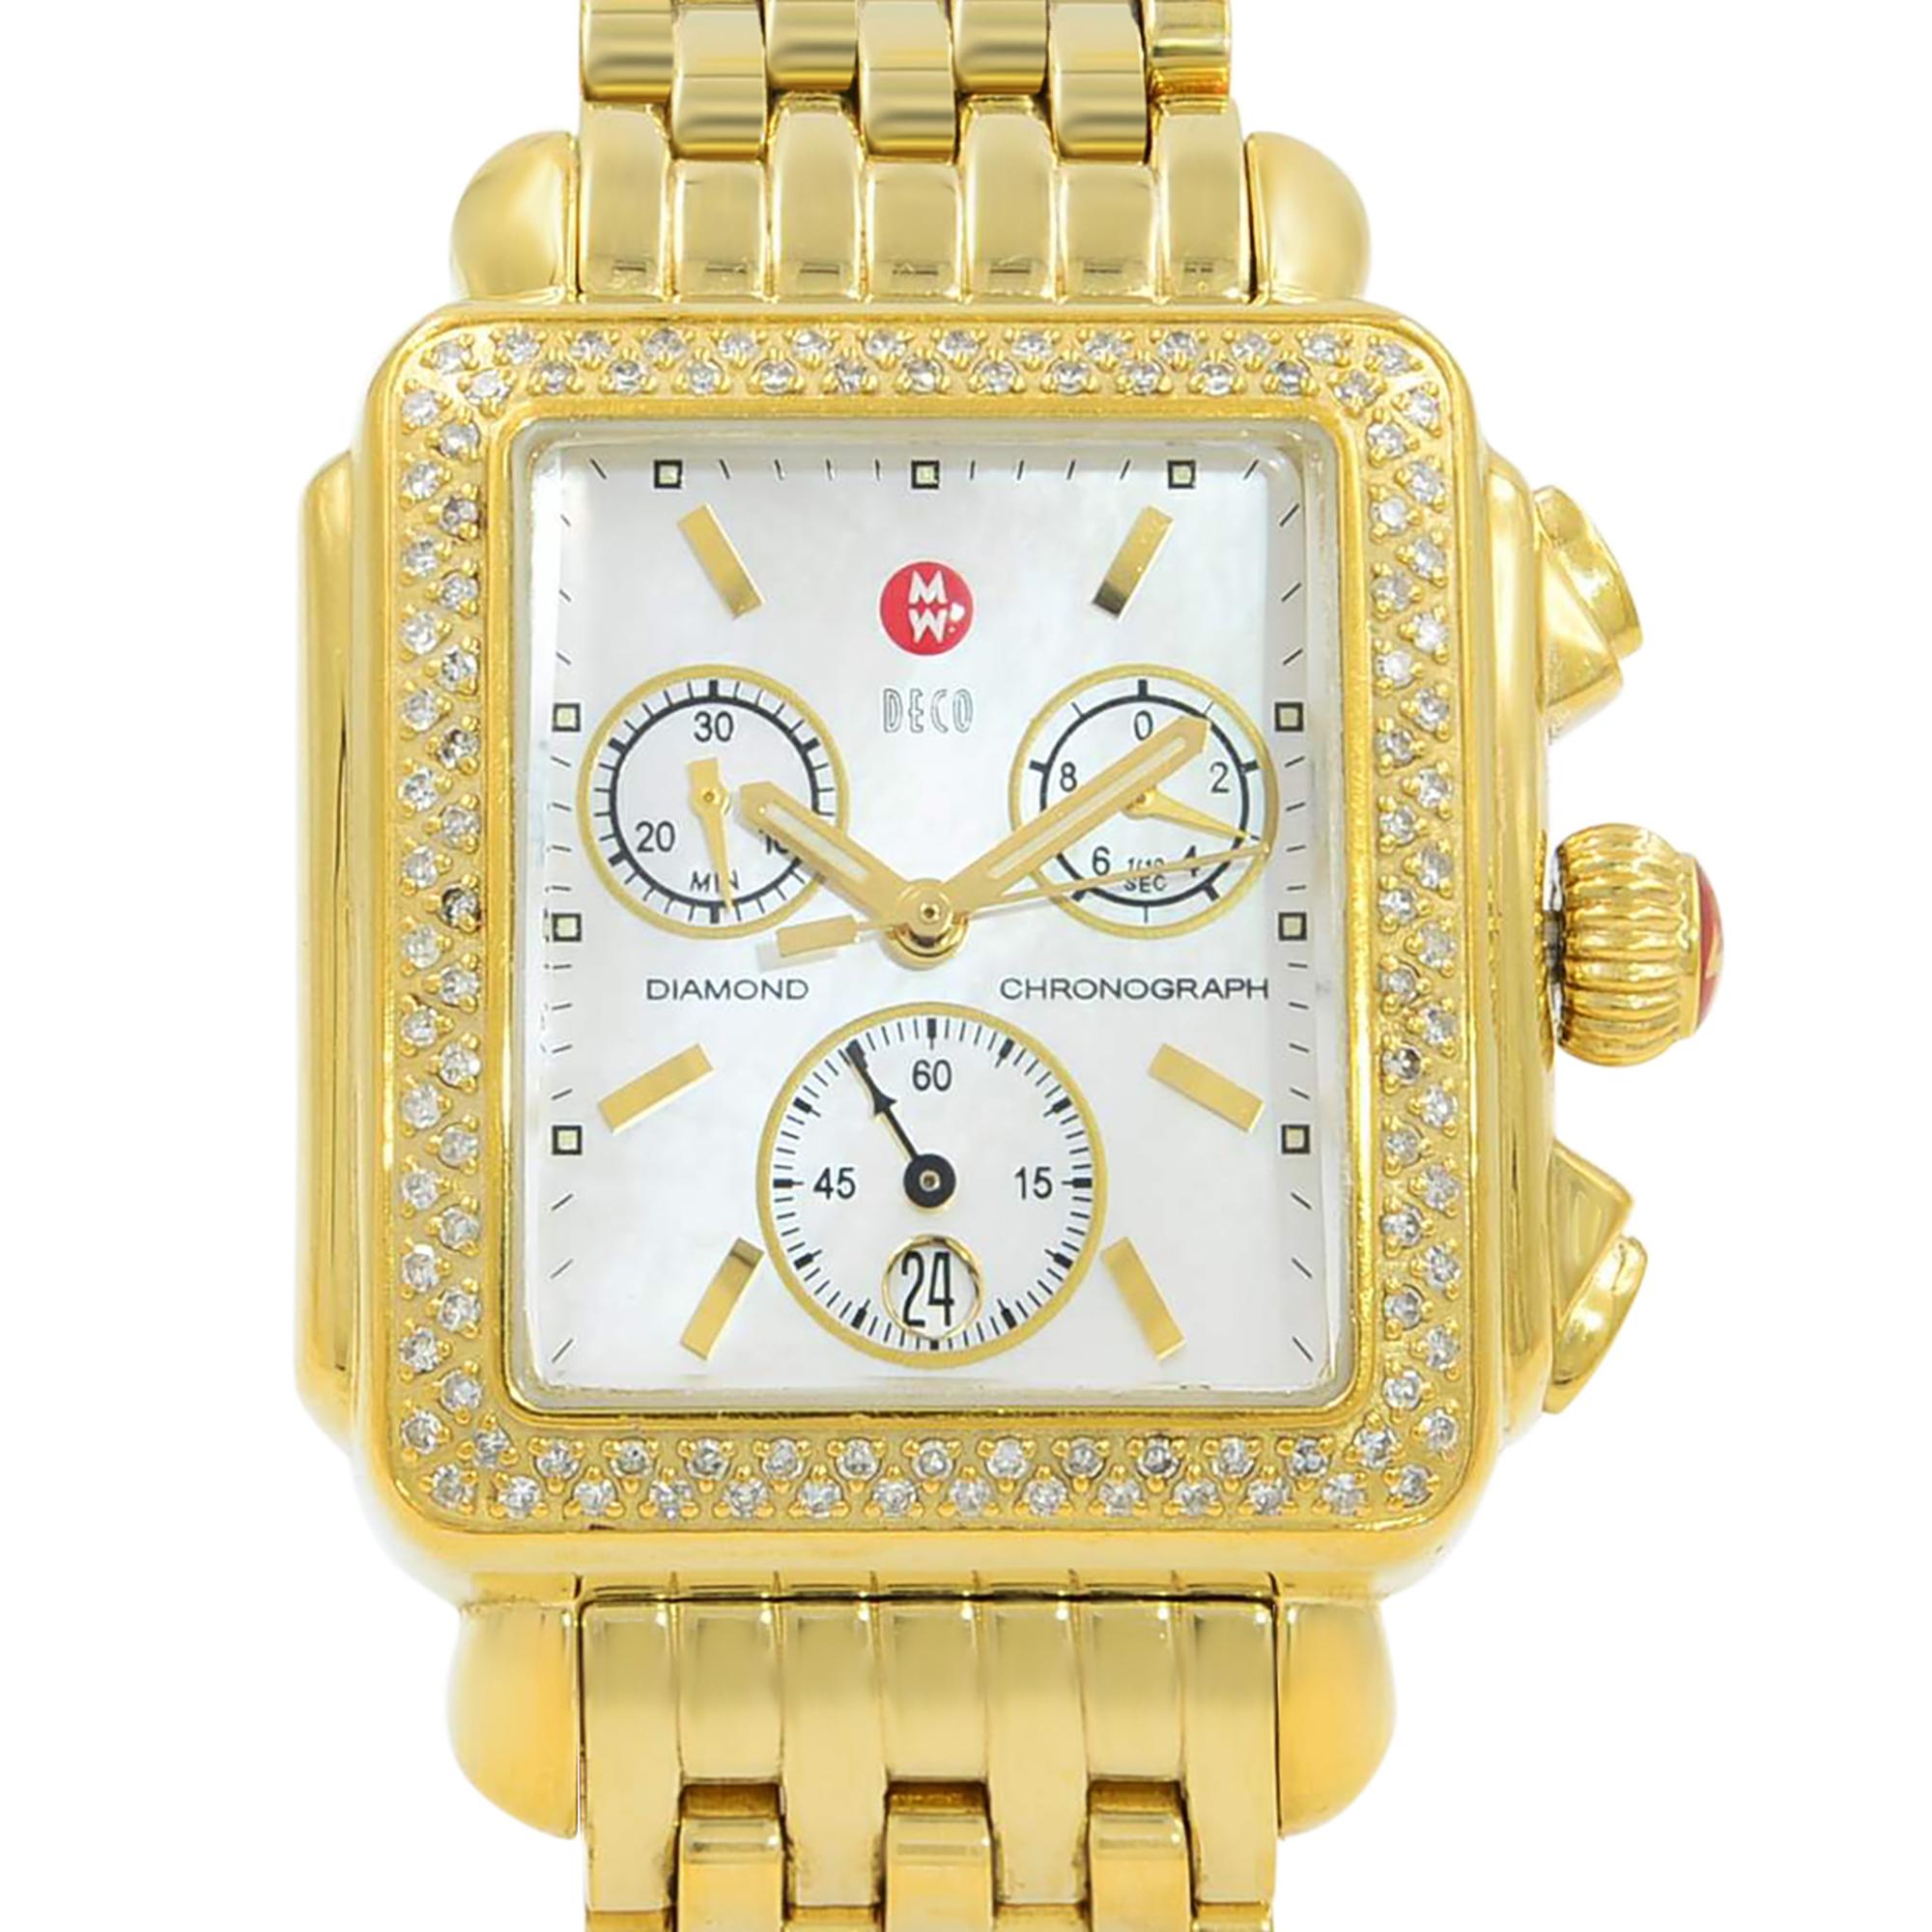 This pre-owned Michele Deco MW06A01B0025 is a beautiful Ladies timepiece that is powered by a quartz movement which is cased in a stainless steel case. It has a rectangle shape face, chronograph, date, diamonds, small seconds subdial dial and has